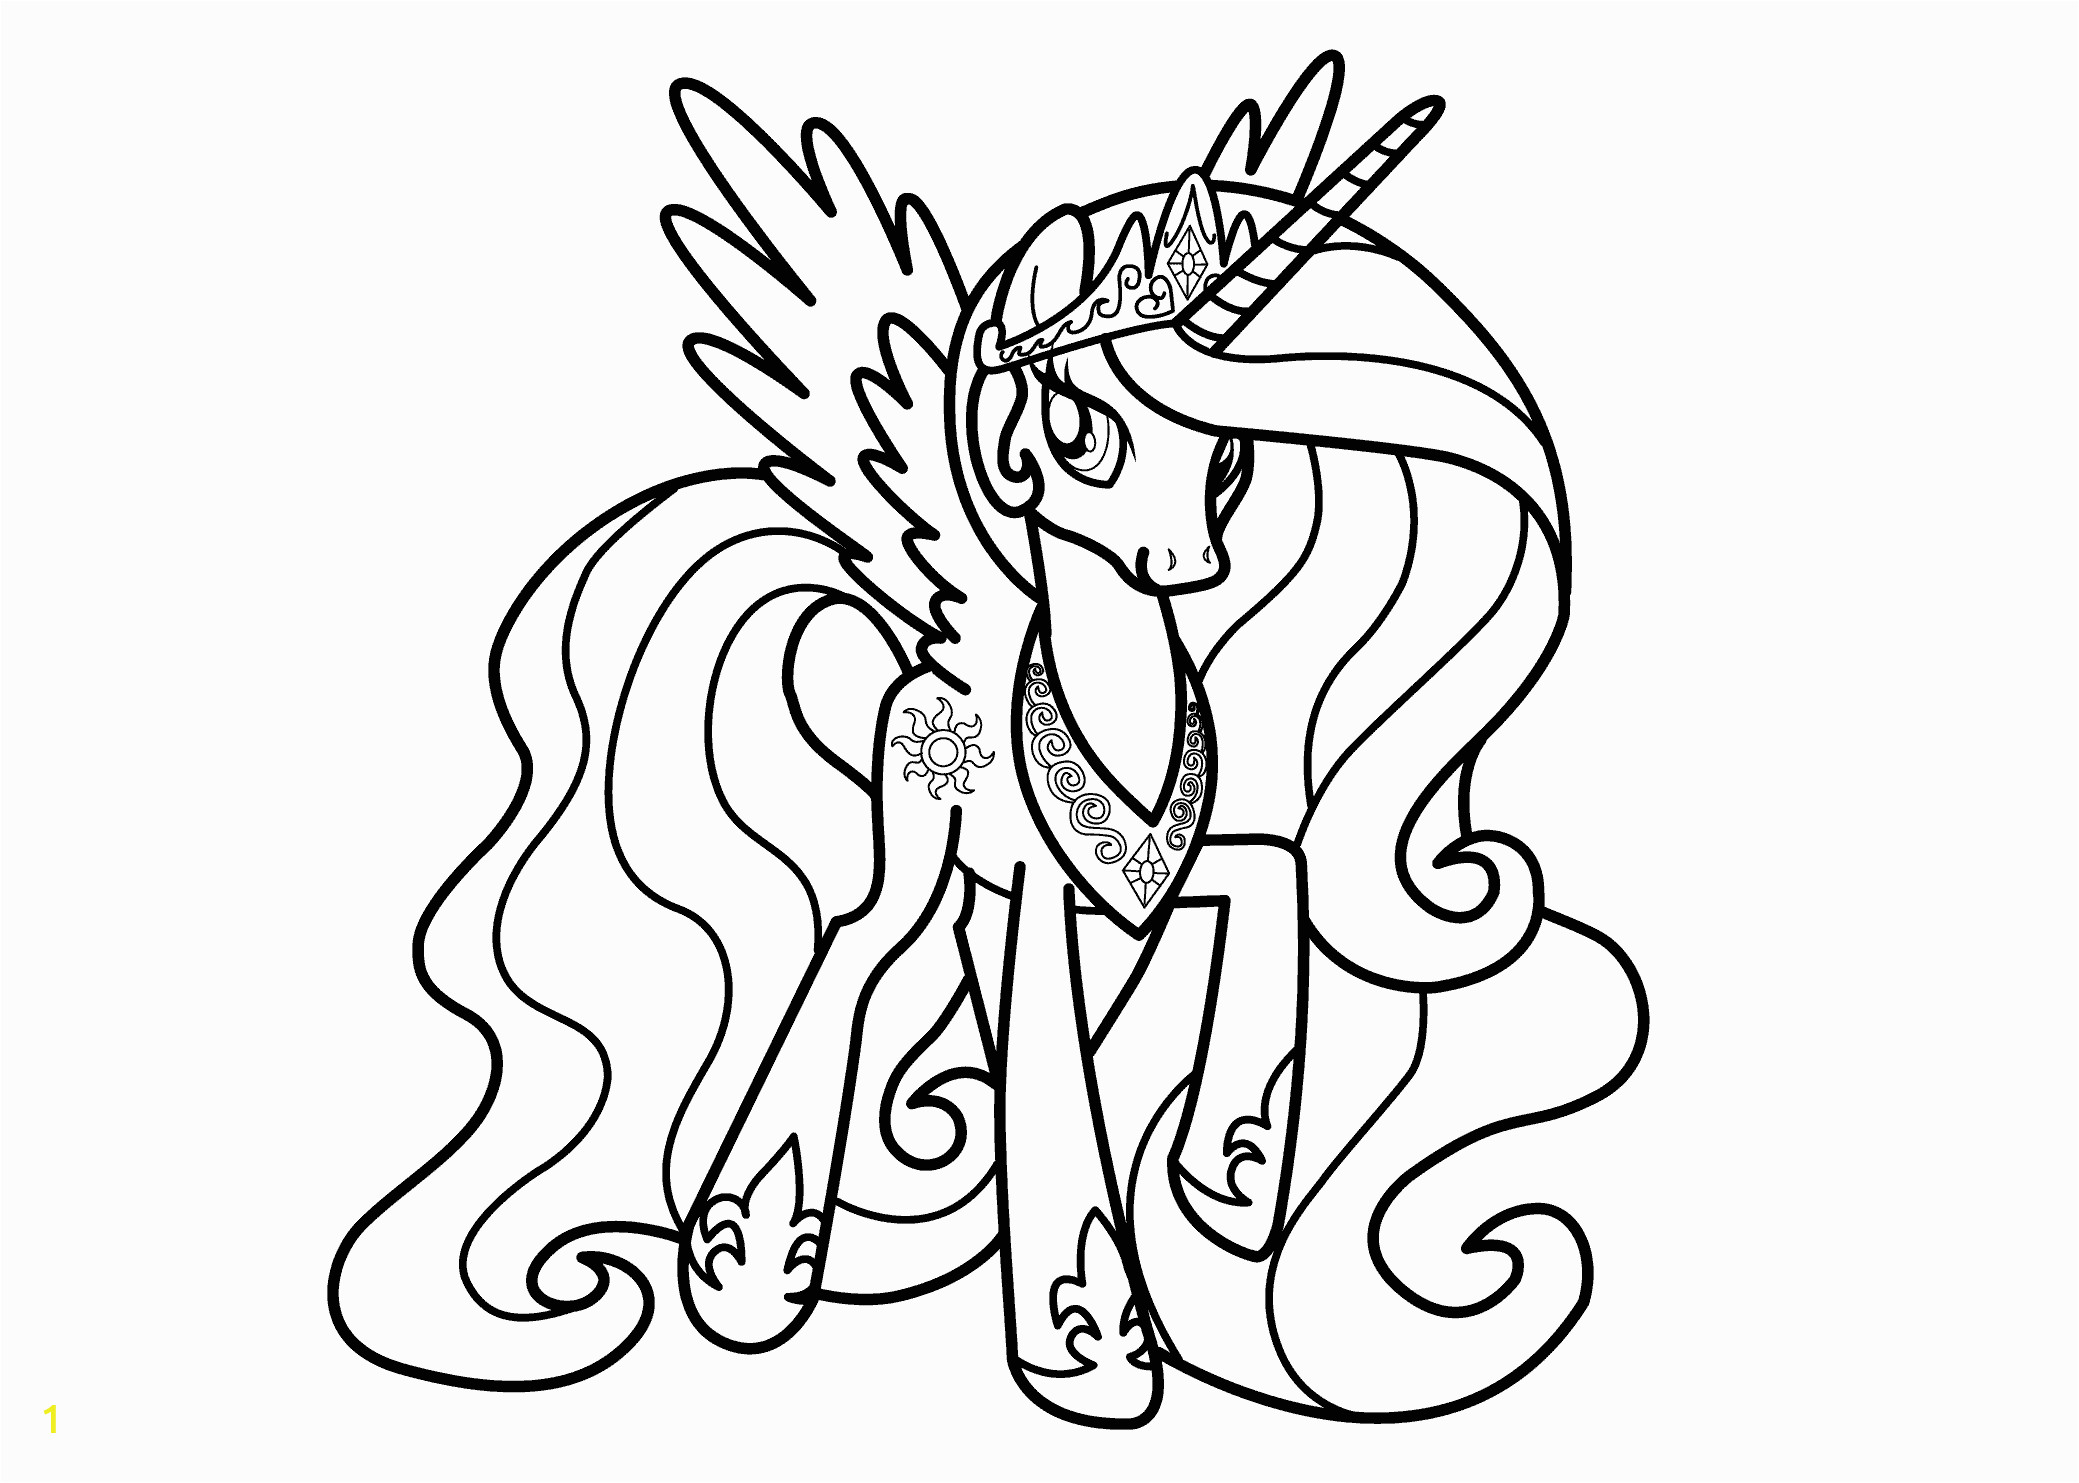 My Little Pony Coloring Pages Princess Celestia Princess Celestia Coloring Pages Best Coloring Pages for